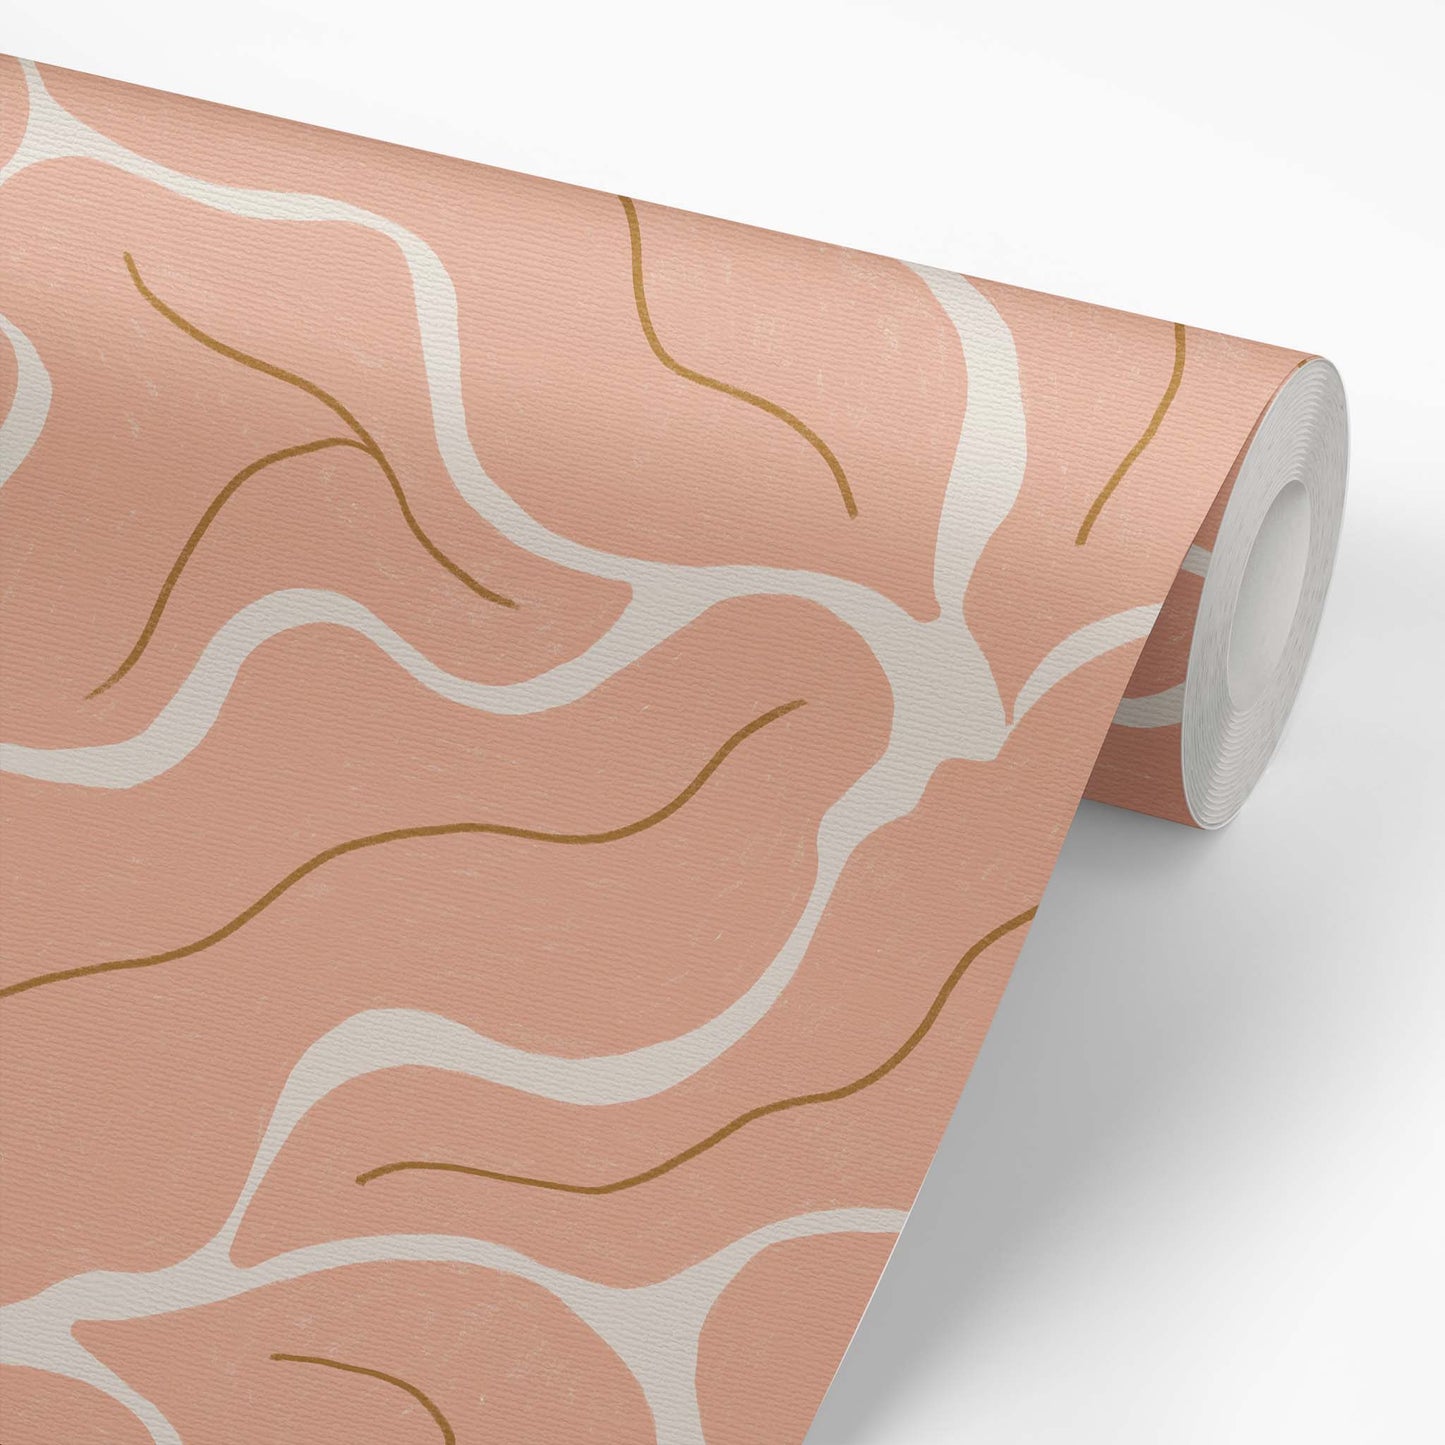 Wallpaper roll featuring our Modern Leaves Wallpaper in Salmon by artist Brenda Bird for Ayara